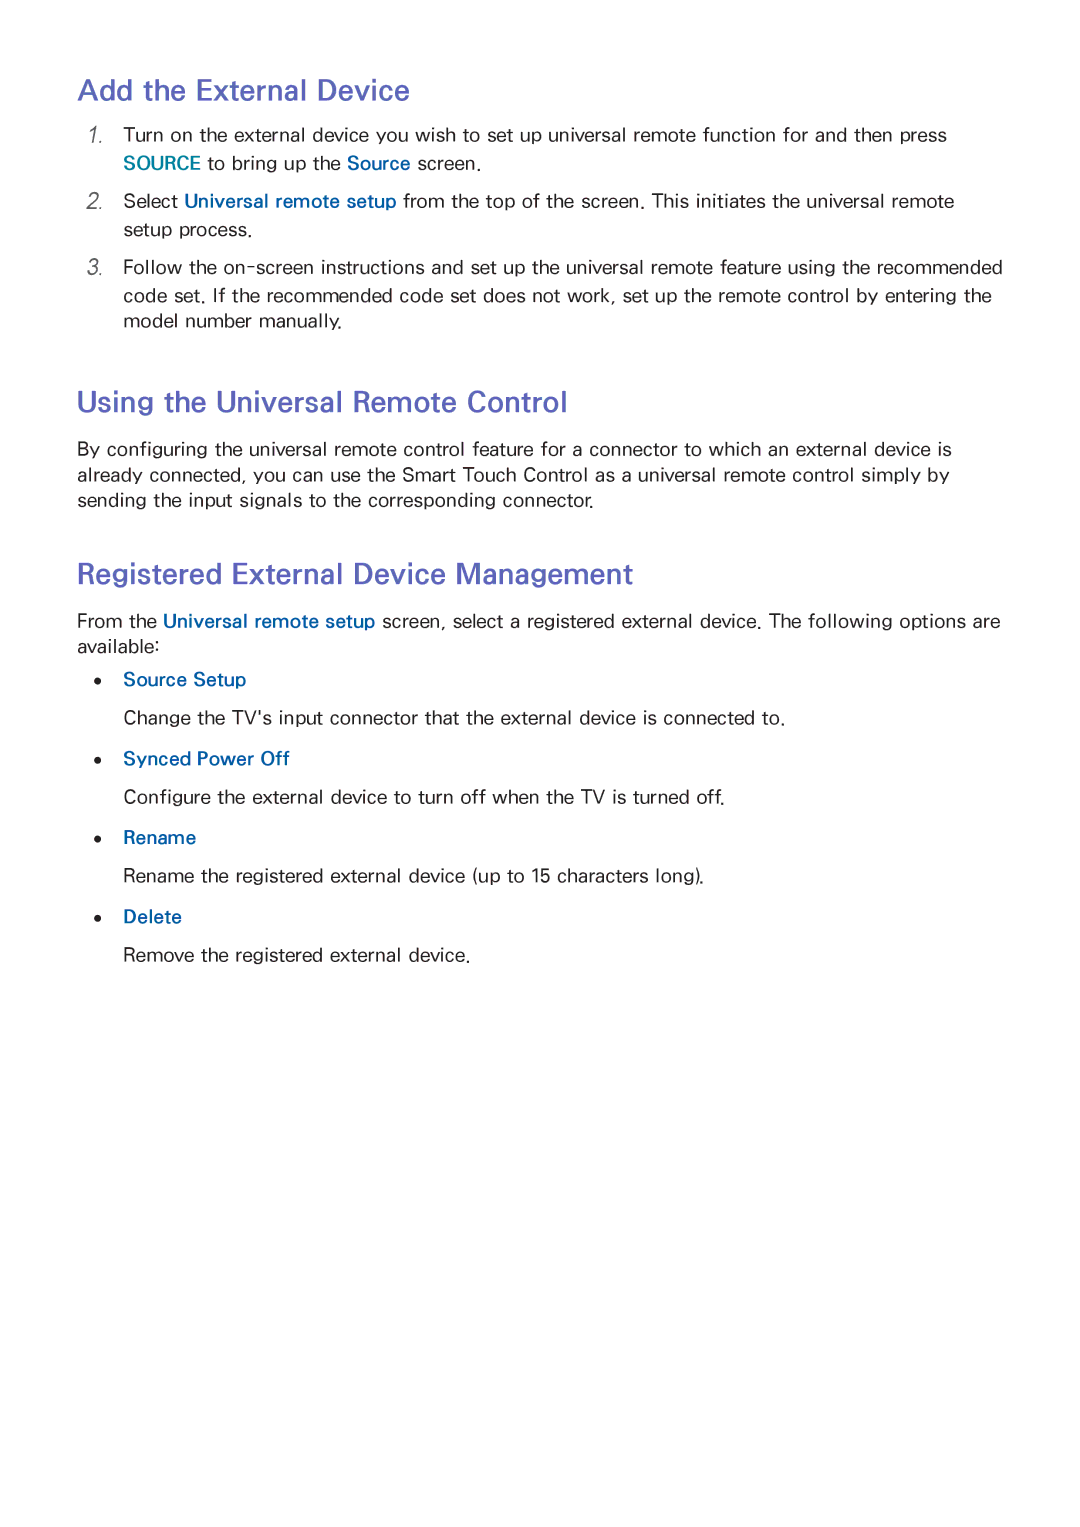 Samsung UA55F6300ARXXV Add the External Device, Using the Universal Remote Control, Registered External Device Management 